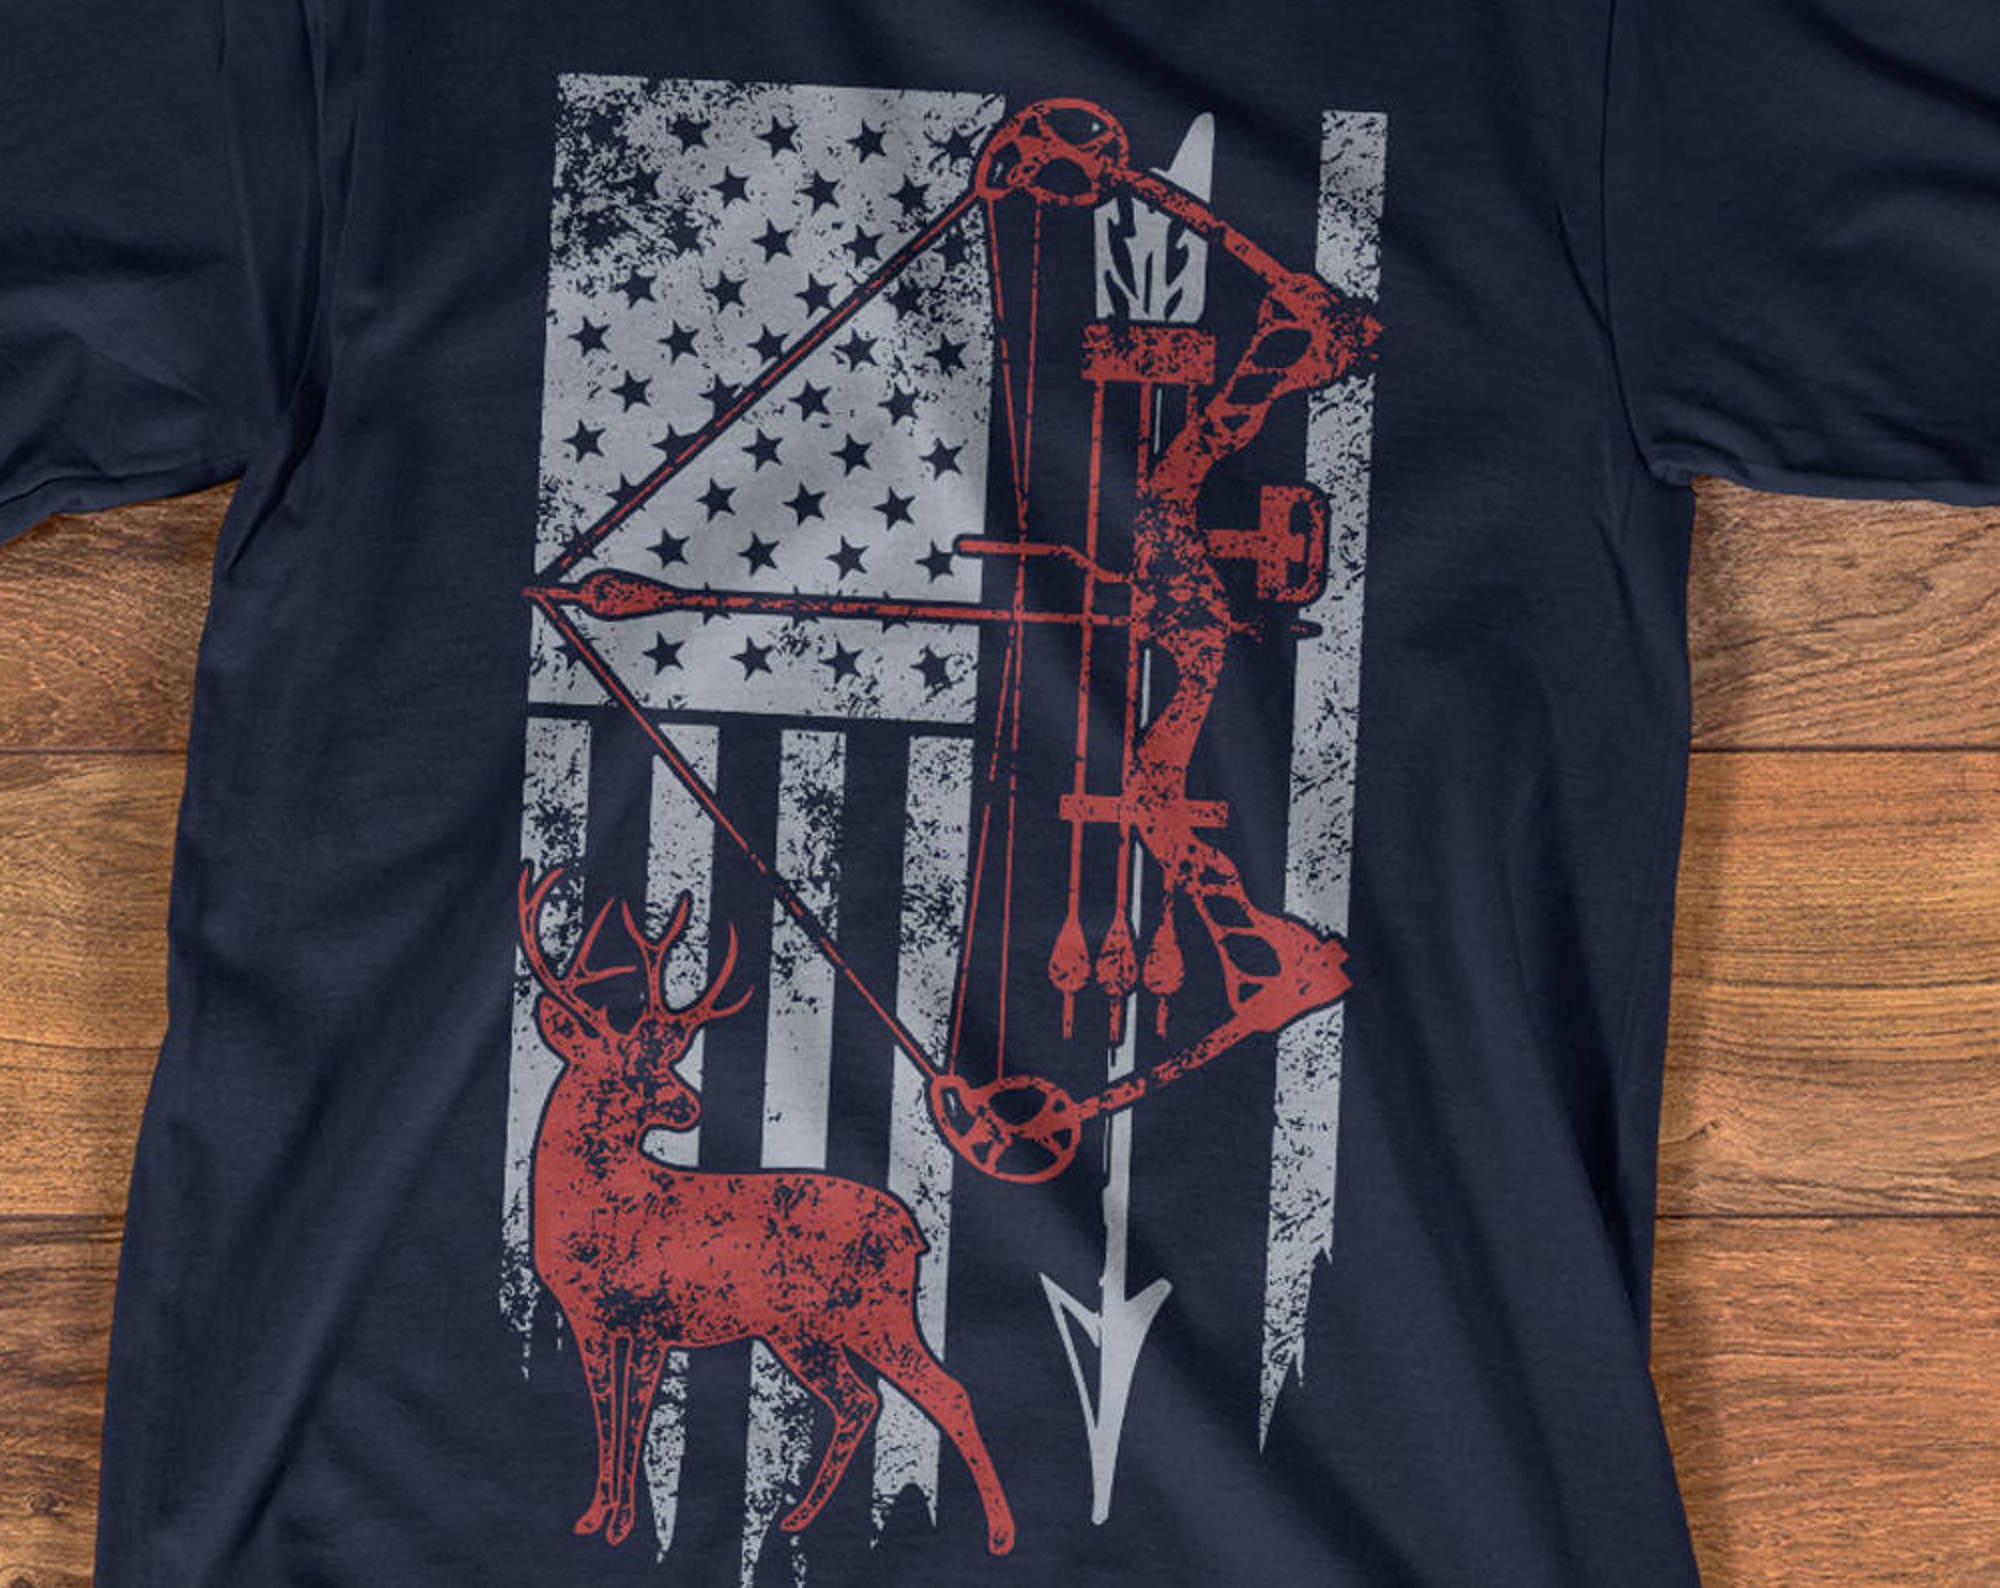 Discover Hunting Shirt with American Flag, Bow Hunting T-shirt, American Hunter Shirt